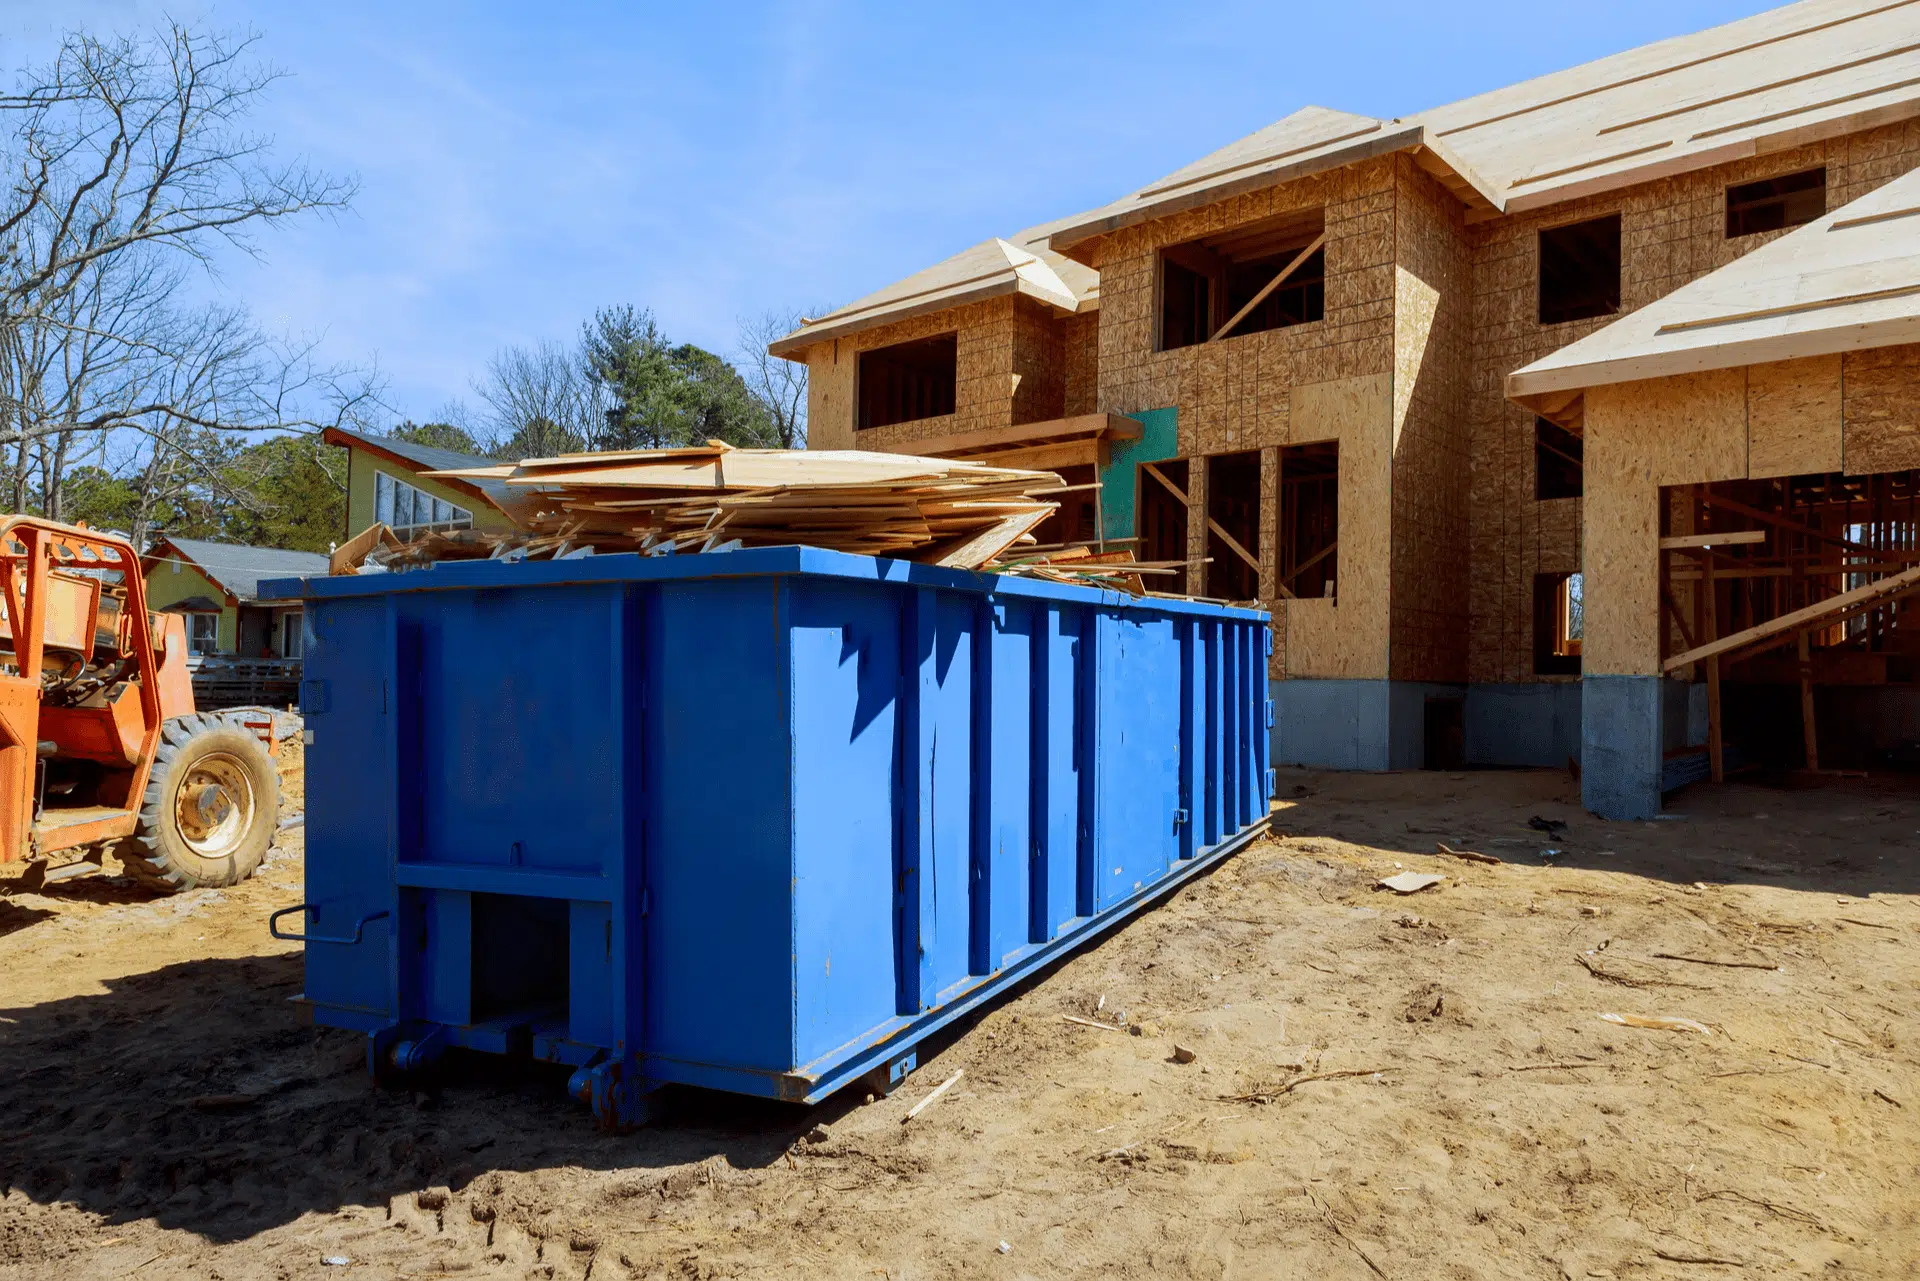 waste management for a home remodel means lots of waste that some people can put to good use